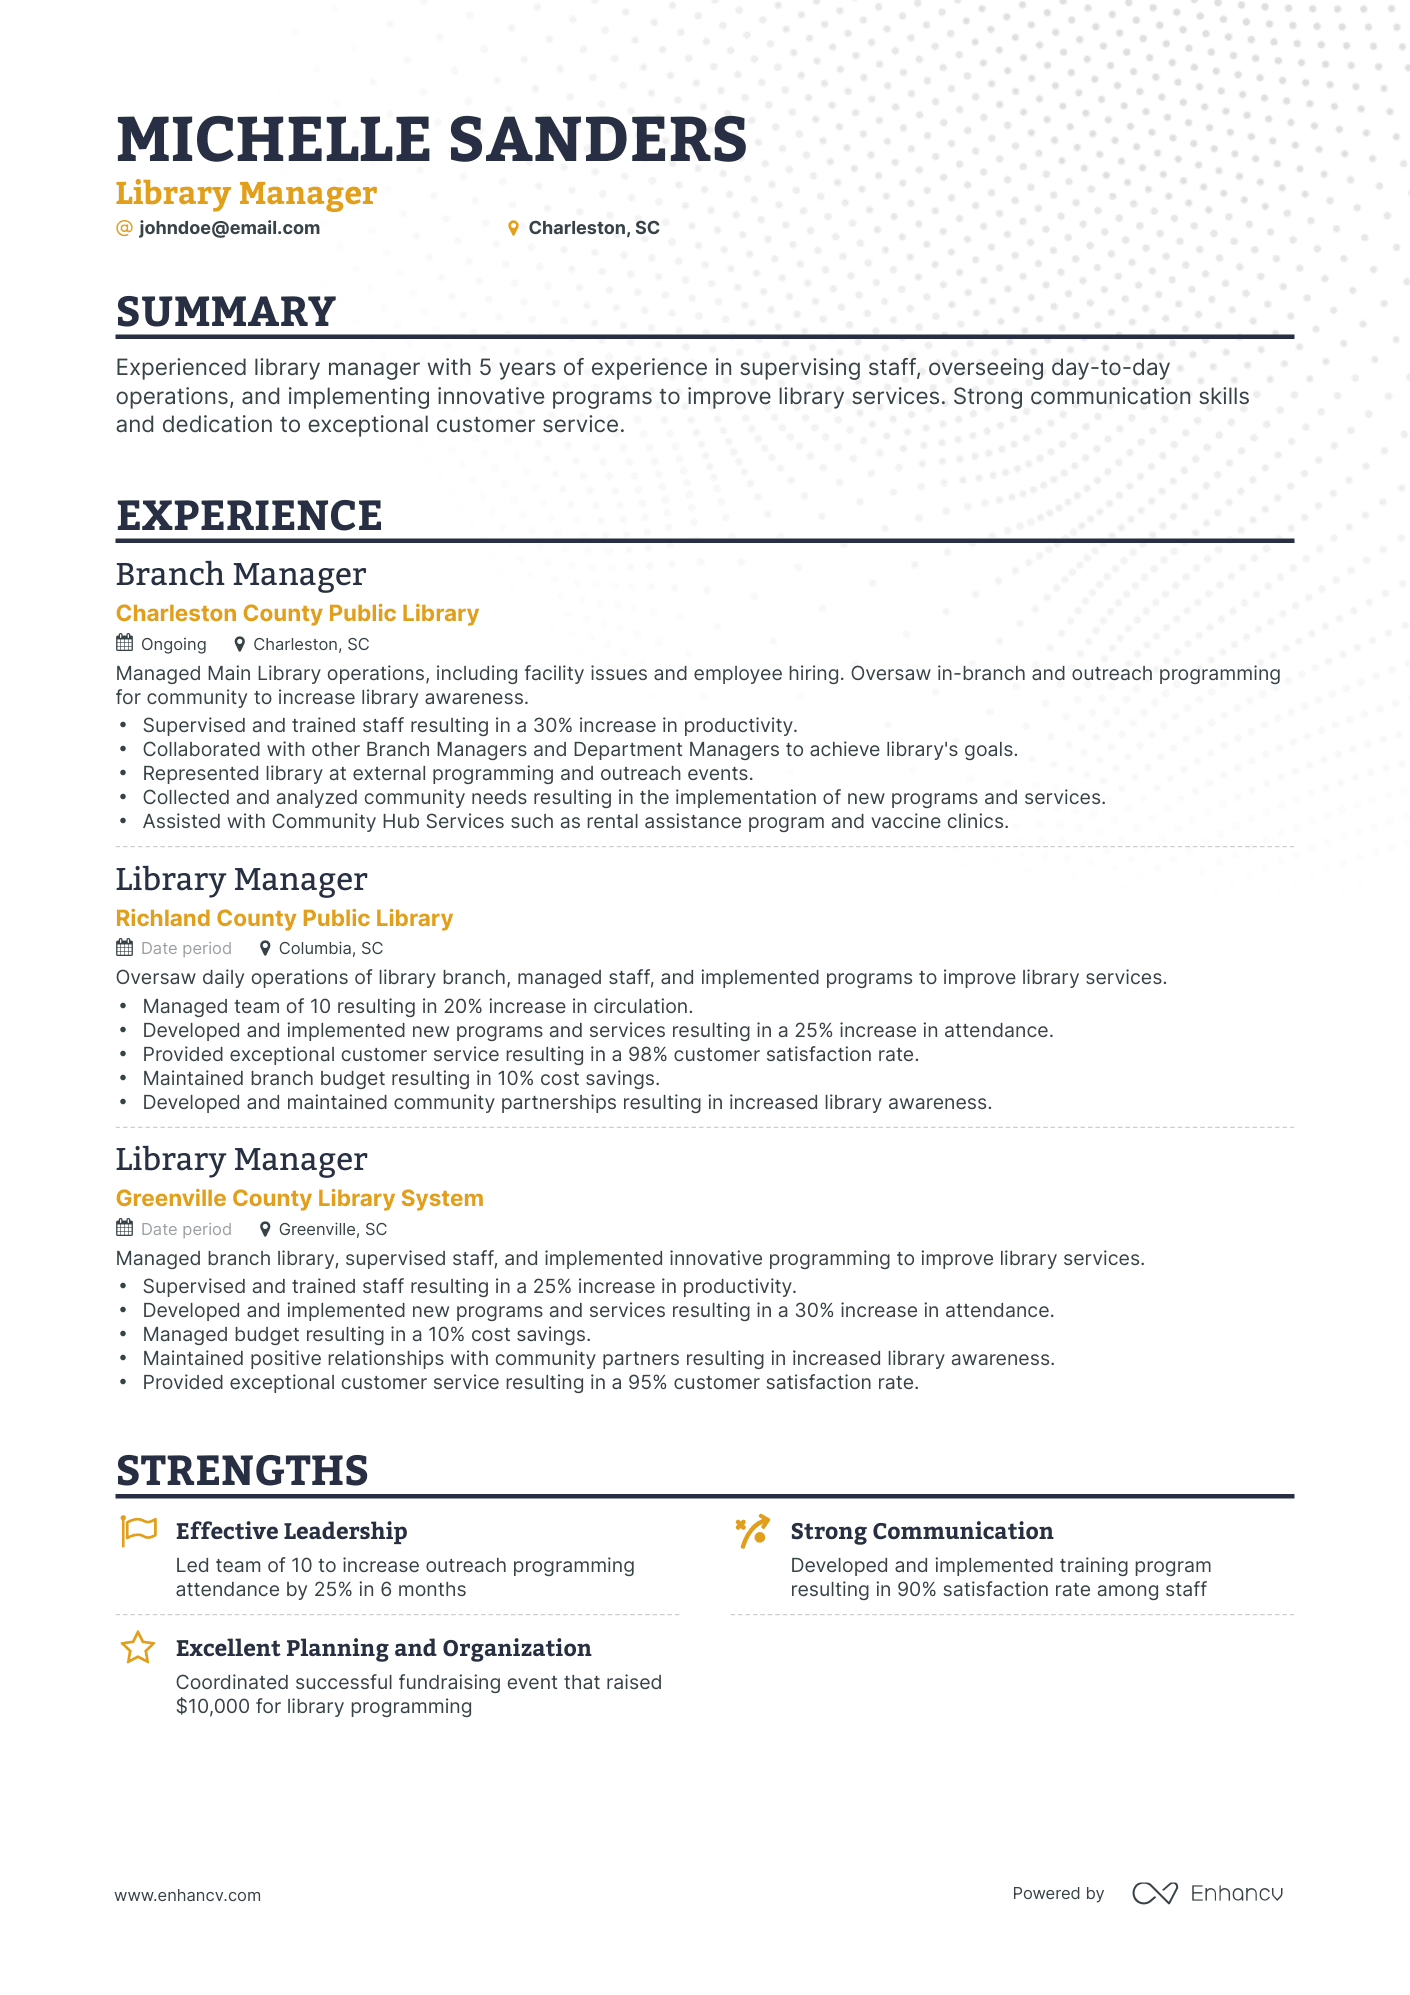 Classic Library Manager Resume Template